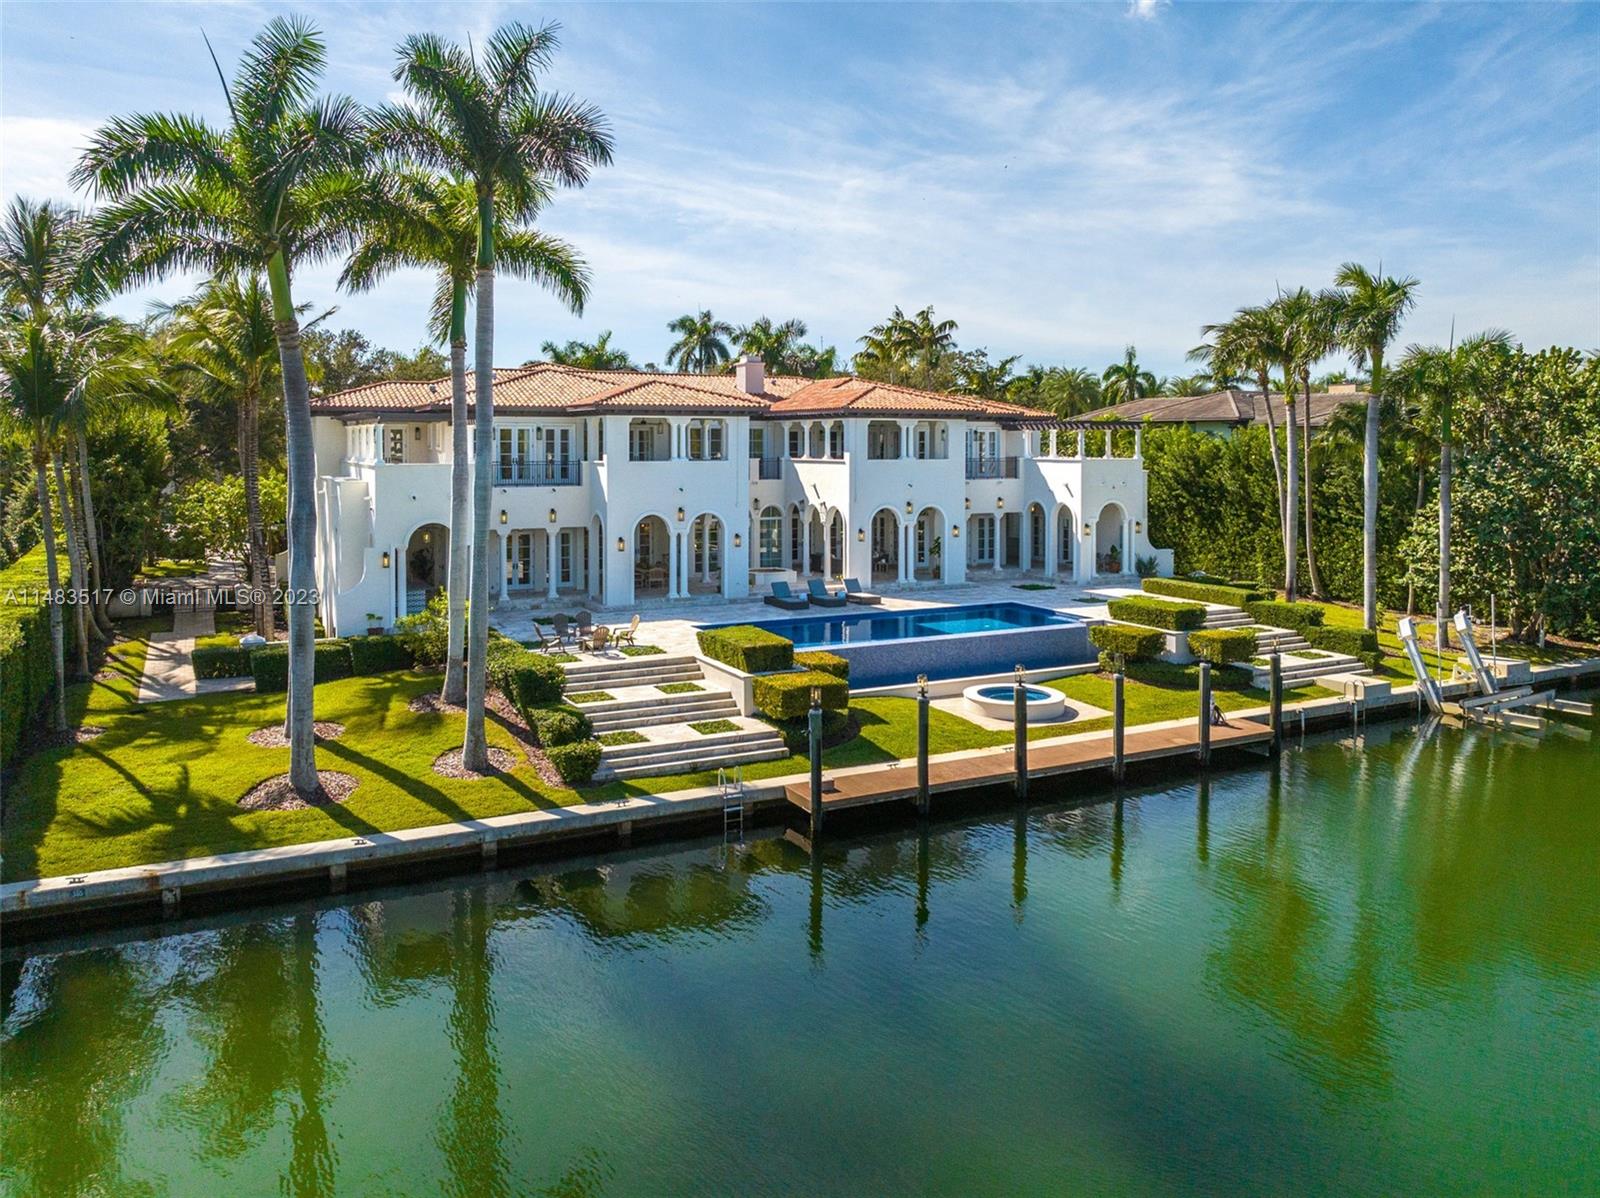 This breathtaking California Modern Spanish WATERFRONT home is in the highly desirable GATED community of GABLES ESTATES. This 10,942 Sf Home has 180 ft of water frontage & a private dock with no bridges to the bay sitting on a 38,289 SF lot. This grand estate offers 8 bedrooms, 8 full baths, 3 half baths, Crestron smart house, surround sound in every room, private balconies with lush views, and various outdoor amenities, including a cabana spa, infinity pool, and more. The primary suite boasts top-of-the-line features and two walk-in closets. With 3 jr suites, 2 staff rooms, the primary suite on the second floor, elevator ready, and a guest suite on the first floor. Ideally located near the best private schools in Miami, this property is perfect for any family to call home.